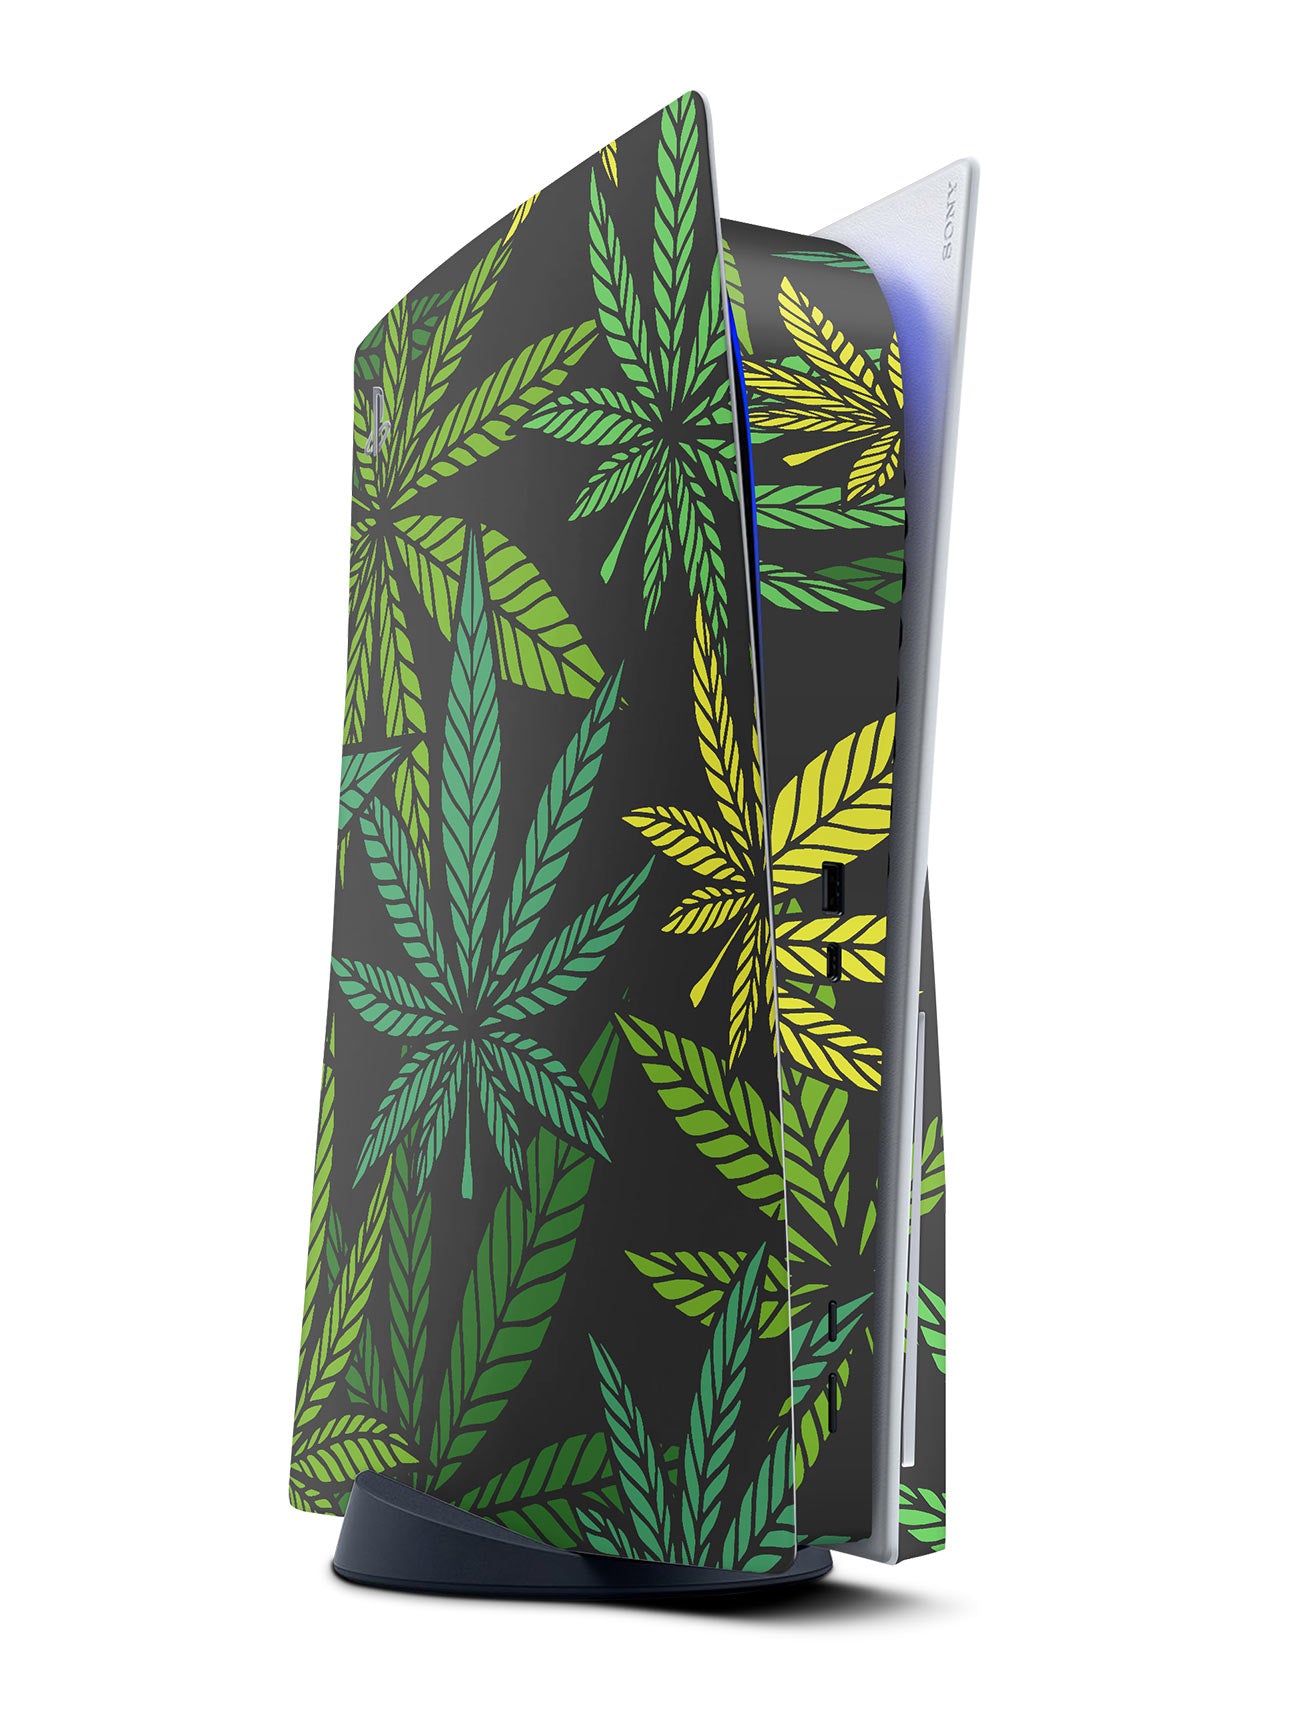 ps5 weed skin